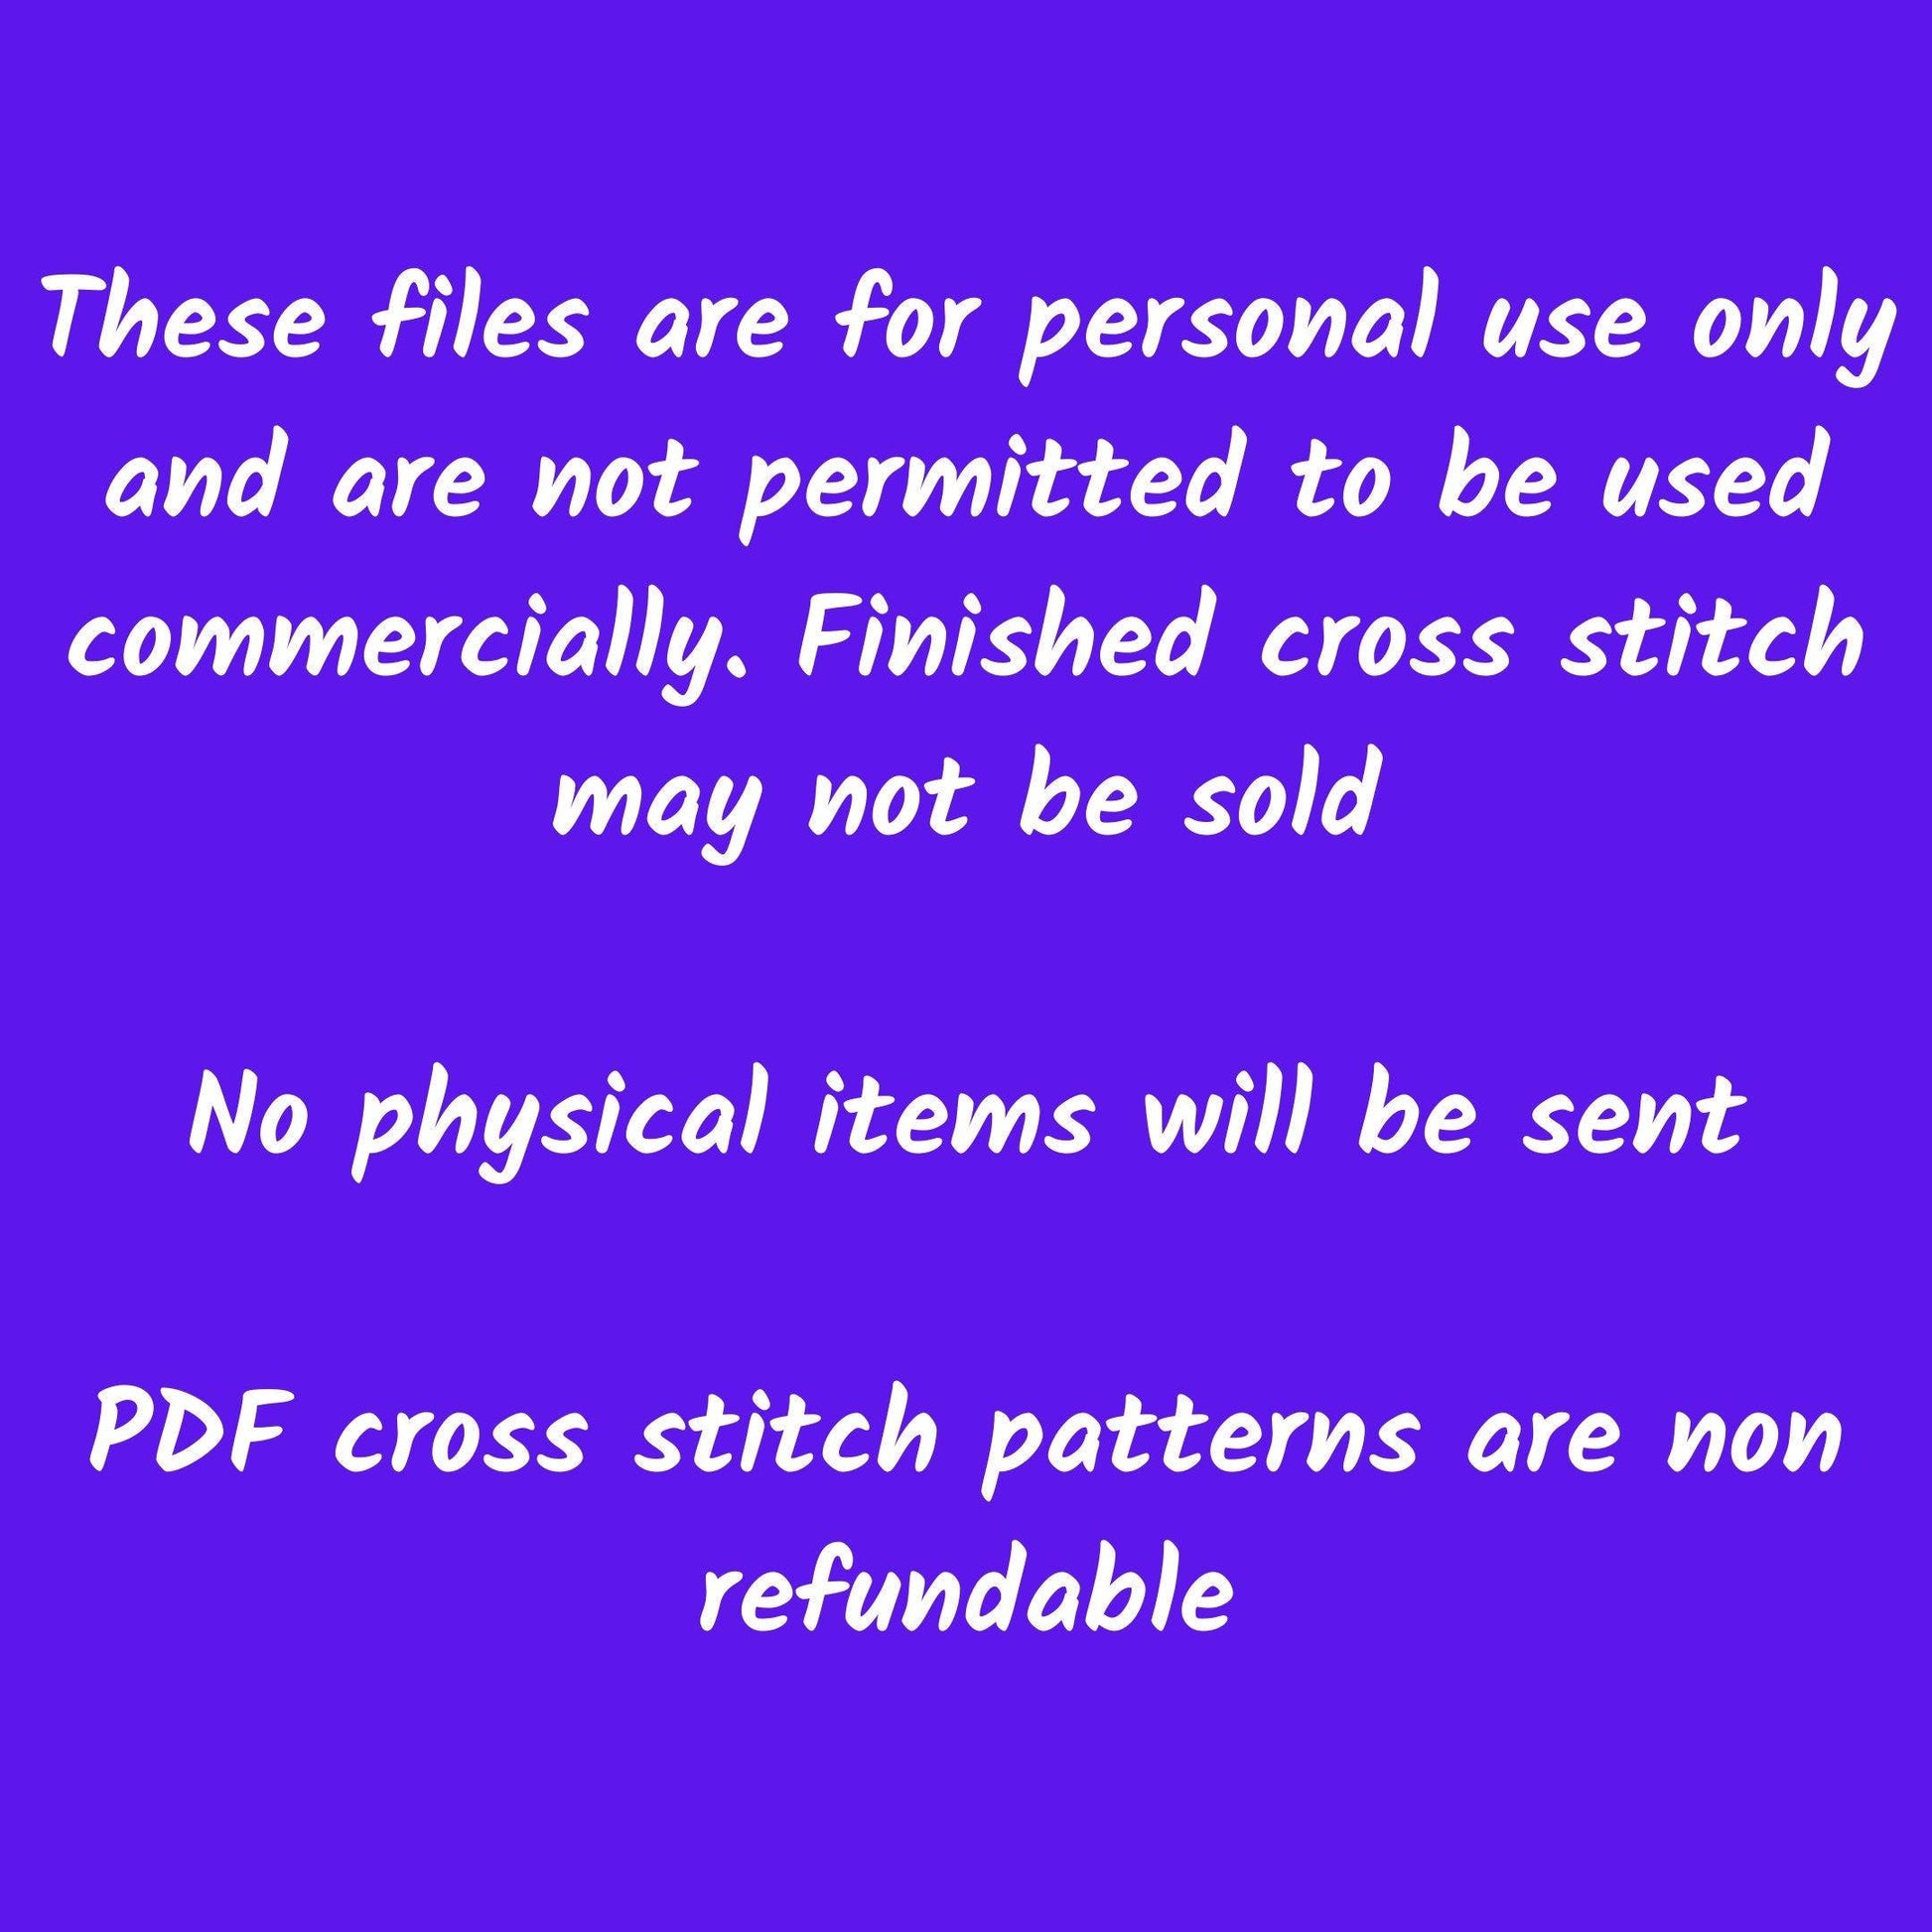 Cross stitch pattern pdf download, image shows instructions in the detail section of the post 